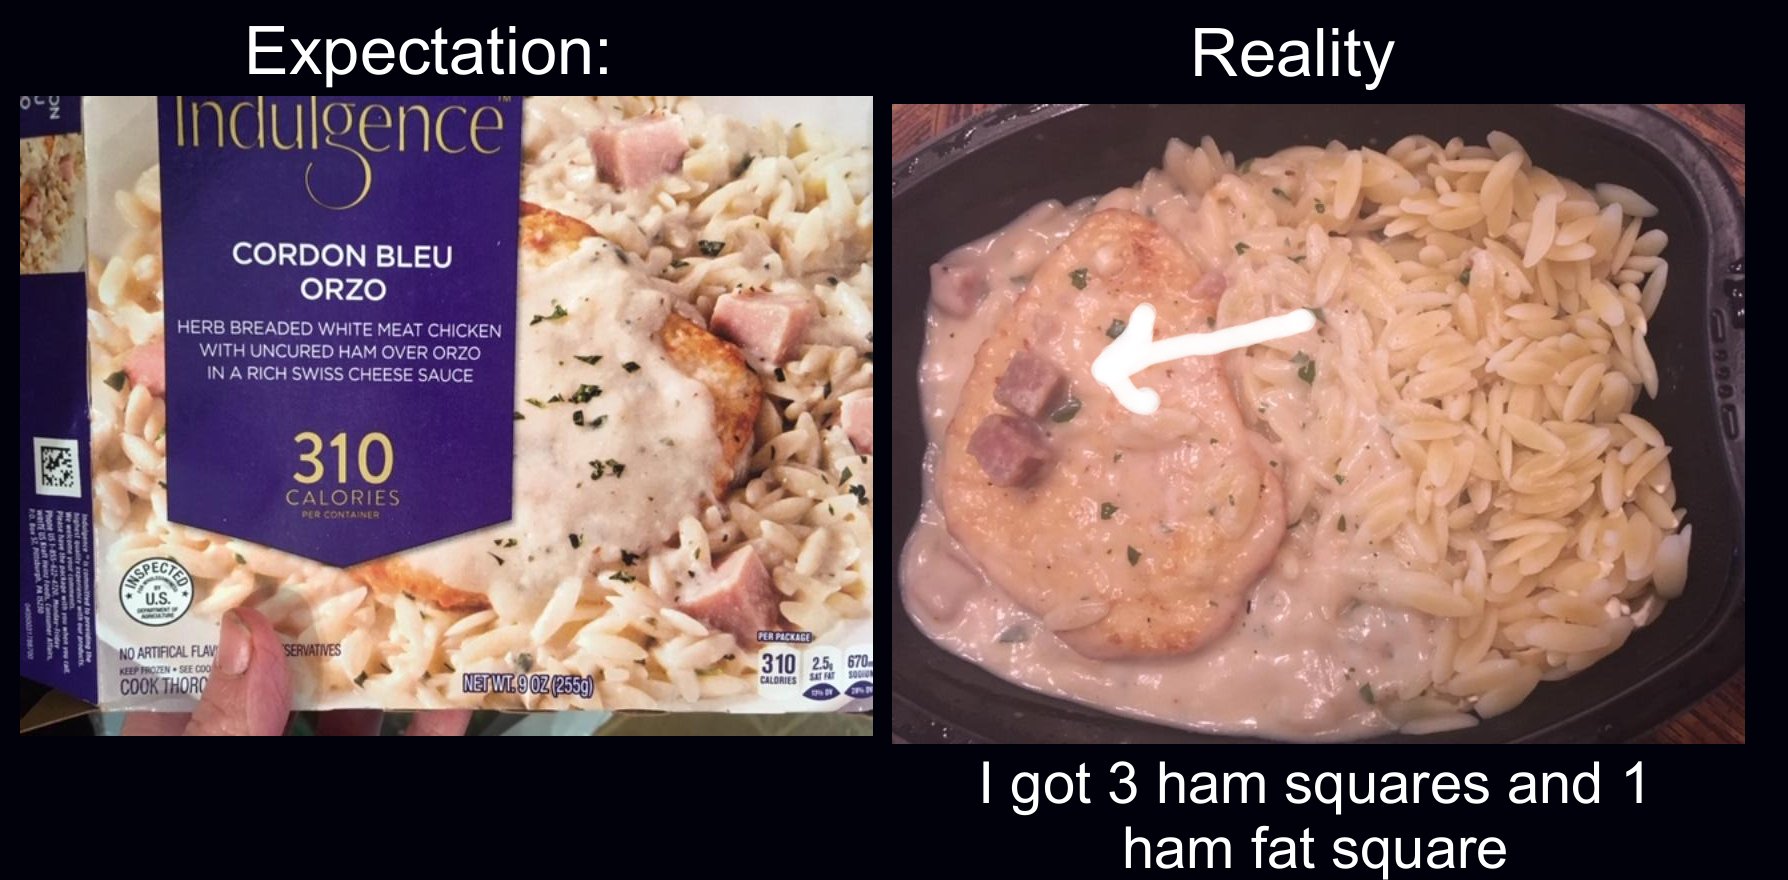 dish - Expectation Indulgence Reality org Cordon Bleu Orzo Herb Breaded White Meat Chicken With Uncured Ham Over Orzo In A Rich Swiss Cheese Sauce 310 W Calories Per Container Nes pe uses 3 d. under the W kompleca med U.S. Per Package Servatives No Artifi